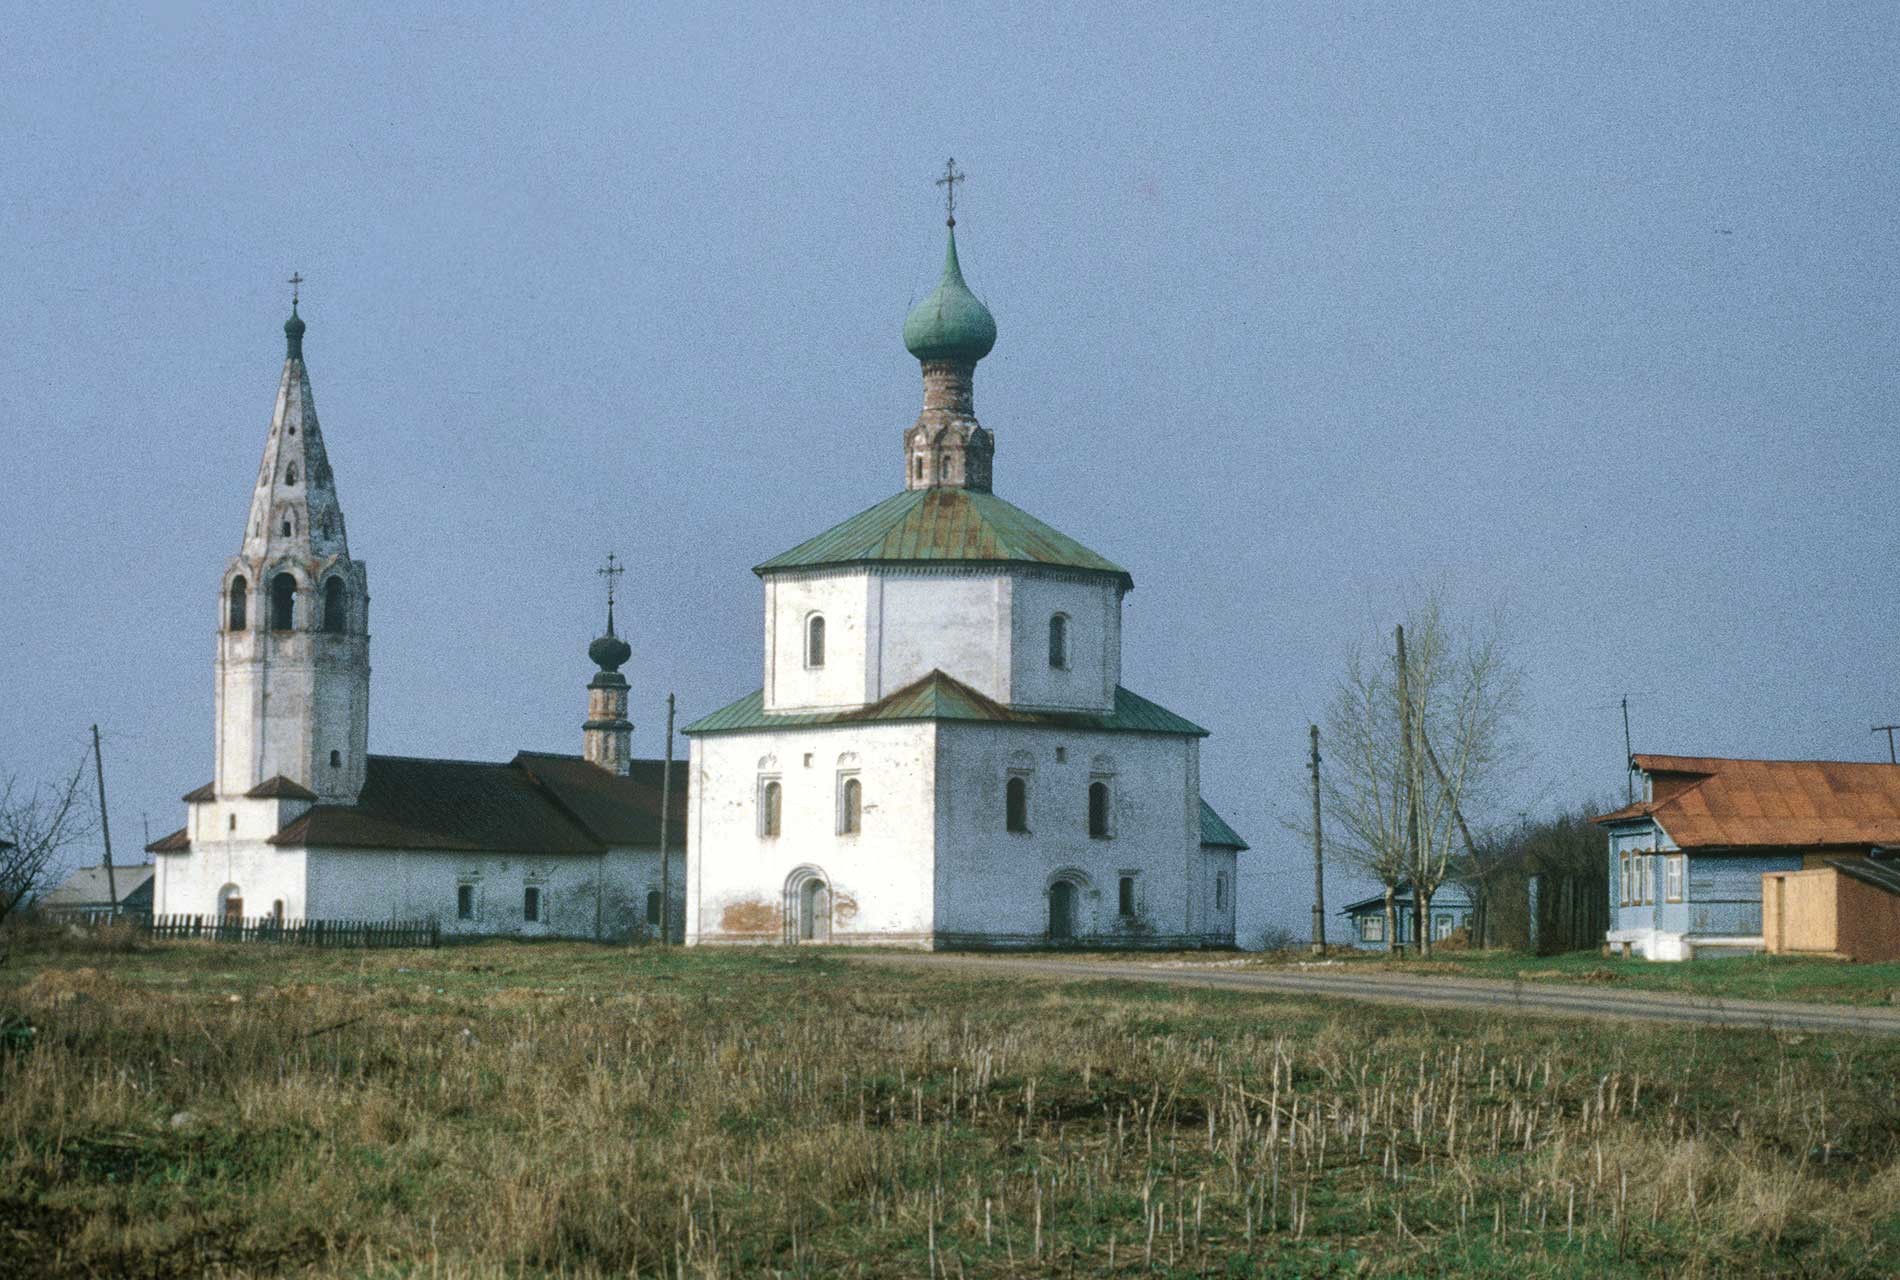 Suzdal. Church of Elevation of the Cross (left)&Church of Sts. Cosma & Damian in Korovniki. Southwest view. April 27, 1980.